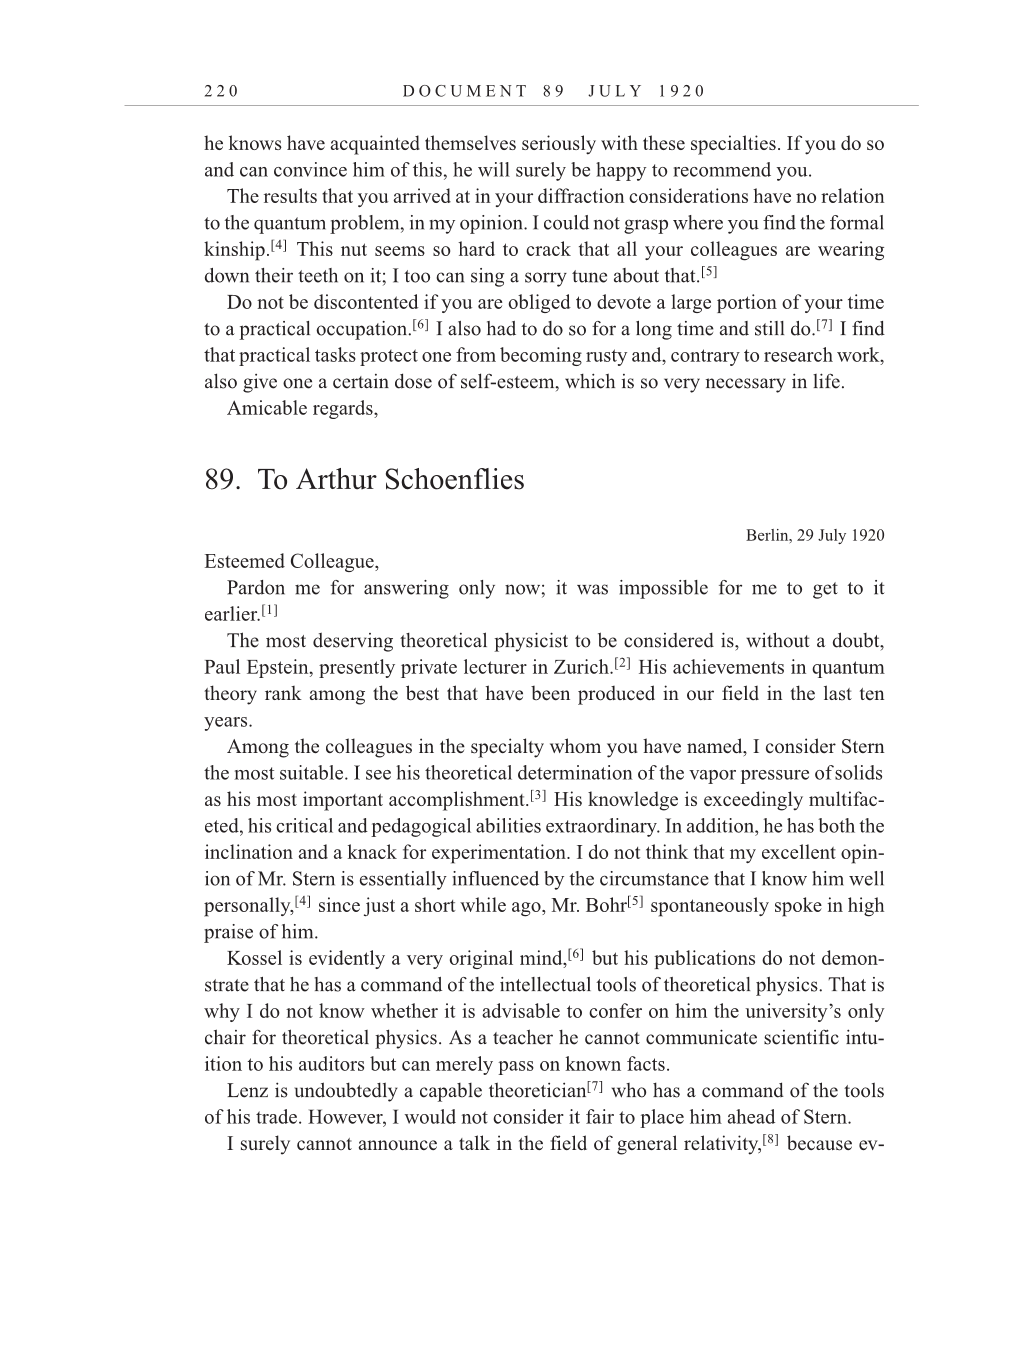 Volume 10: The Berlin Years: Correspondence, May-December 1920, and Supplementary Correspondence, 1909-1920 (English translation supplement) page 220